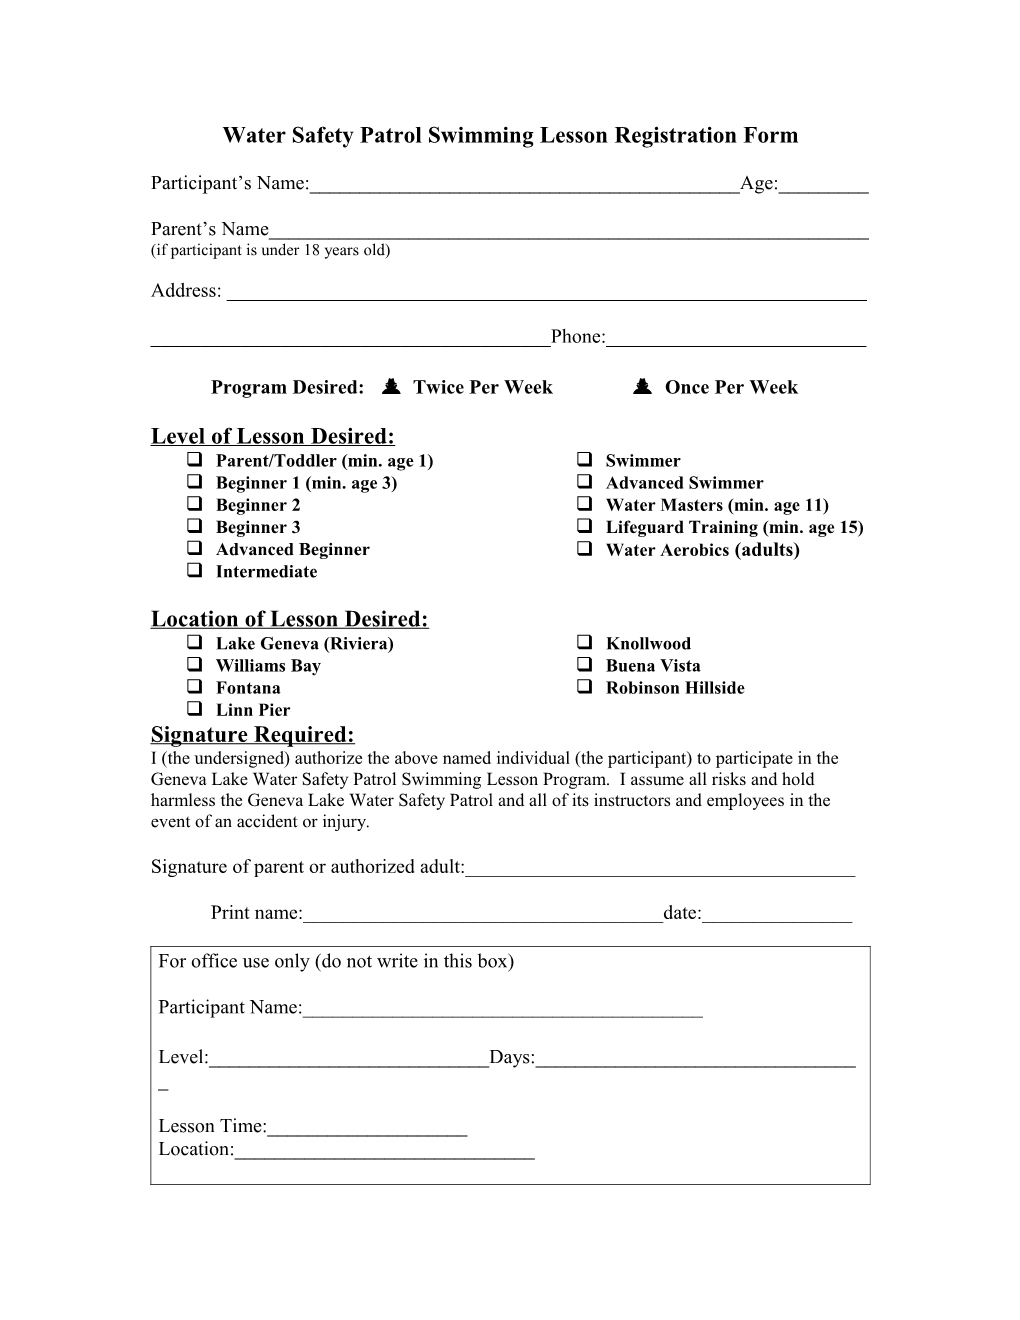 Water Safety Patrol Swimming Lesson Registration Form